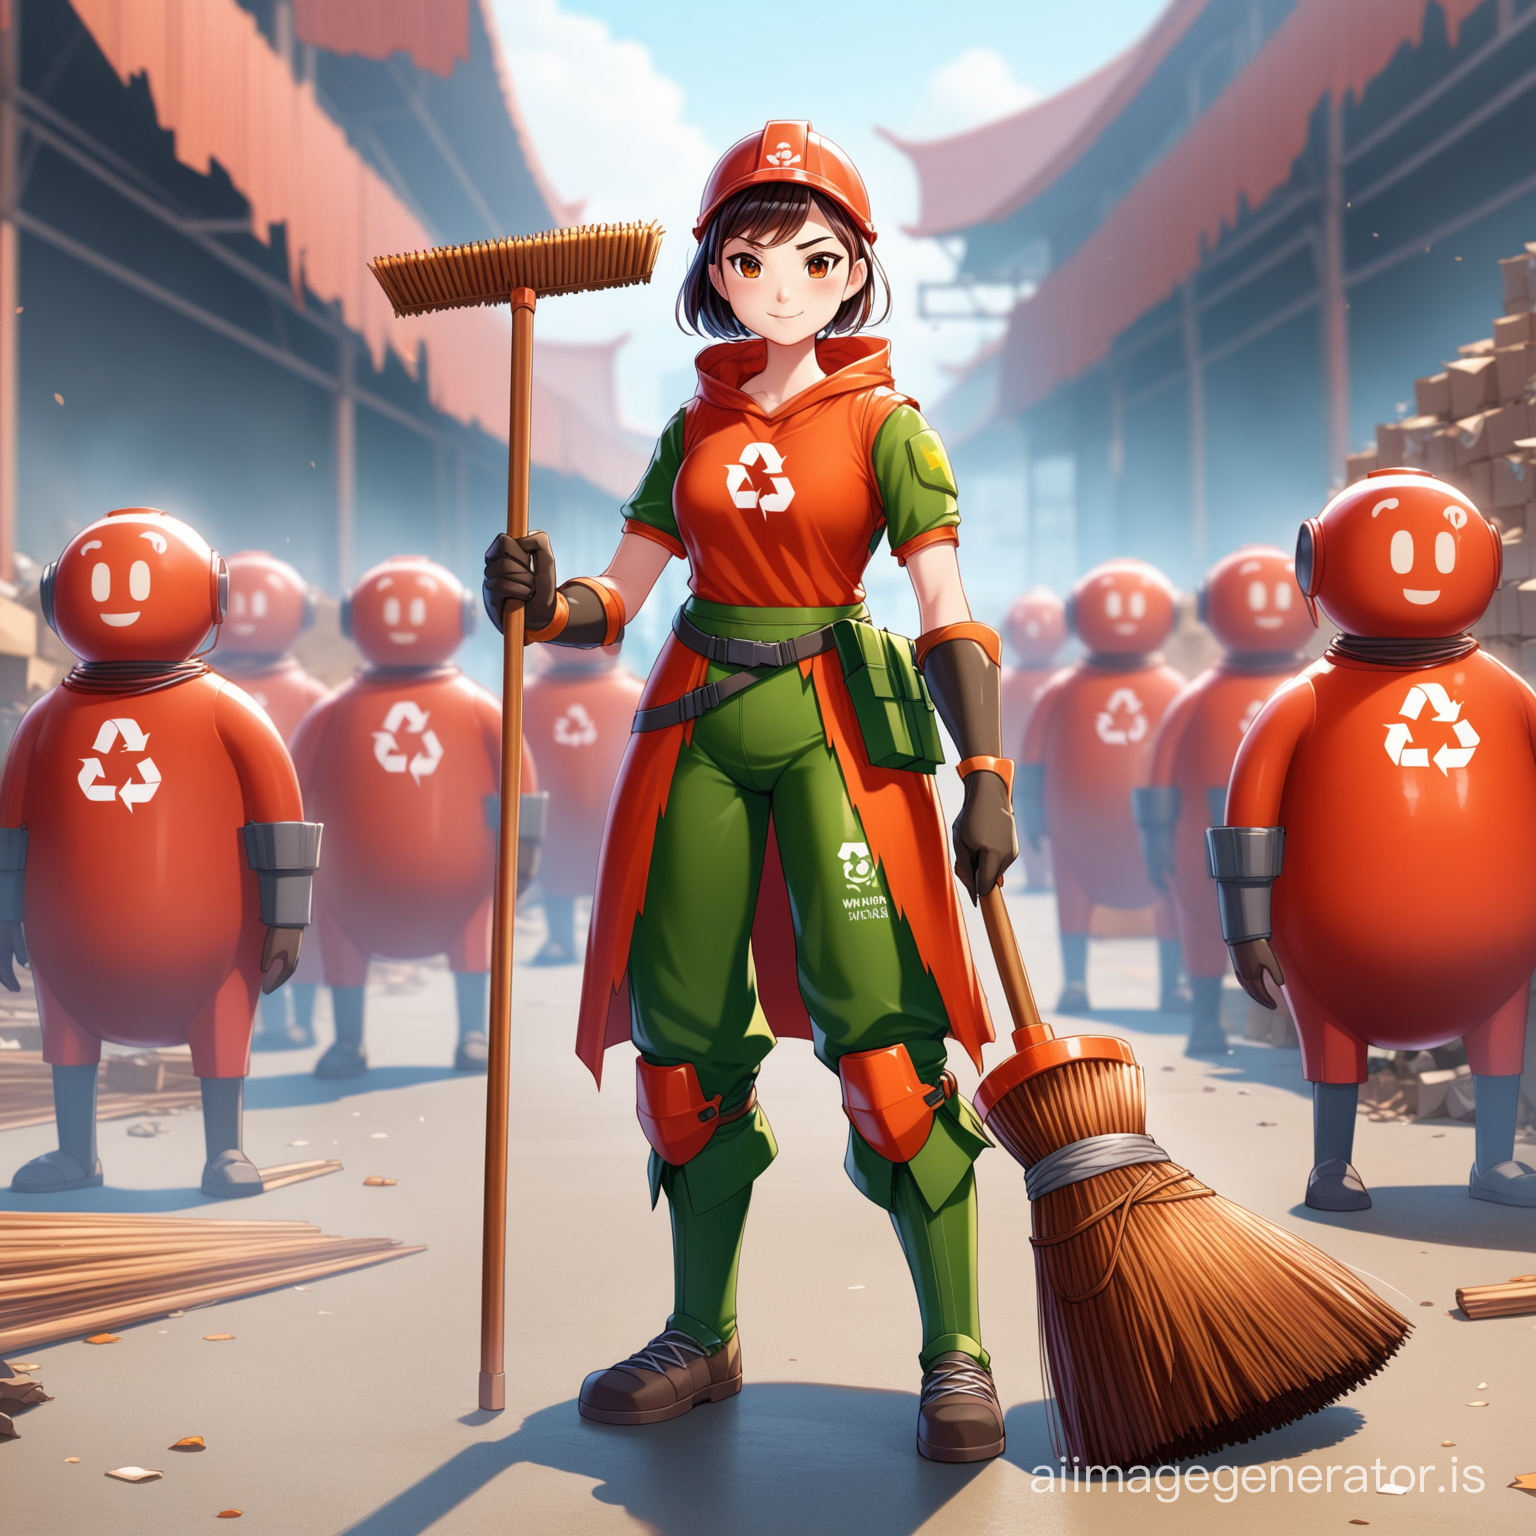 cgi character of waste recycling warrior. Should be holding a broom. Add multiple different characters in the background. Character to be in red. Make character female





